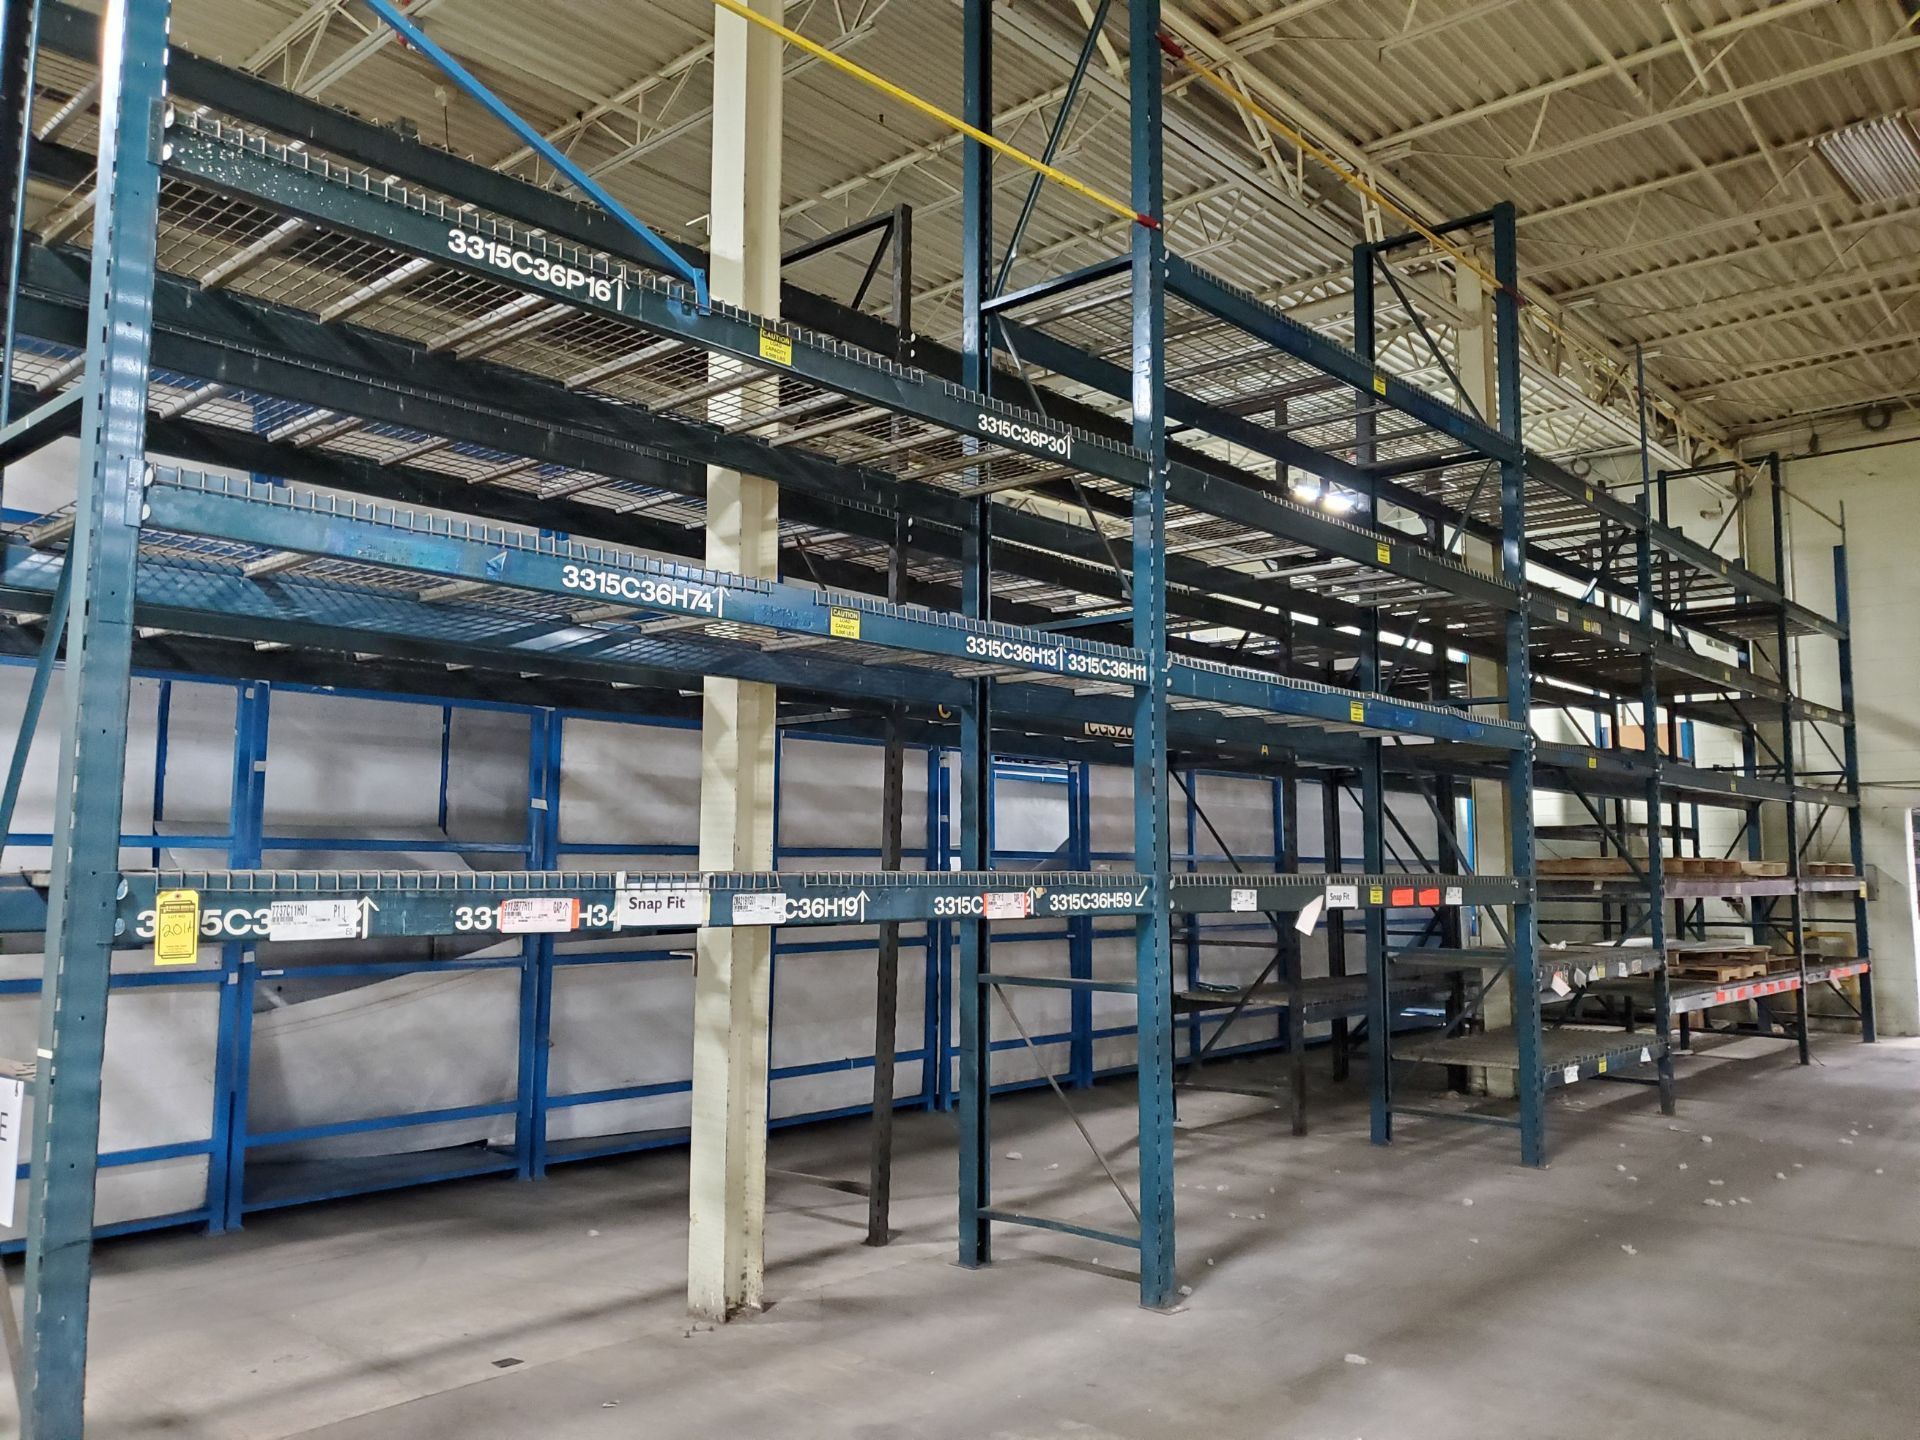 (15) SECTIONS OF ASSORTED SLOT/CORNER LOCK PALLET RACKING - VARIOUS SIZE HEIGHTS (12'-19') AND BEAMS - Image 5 of 6